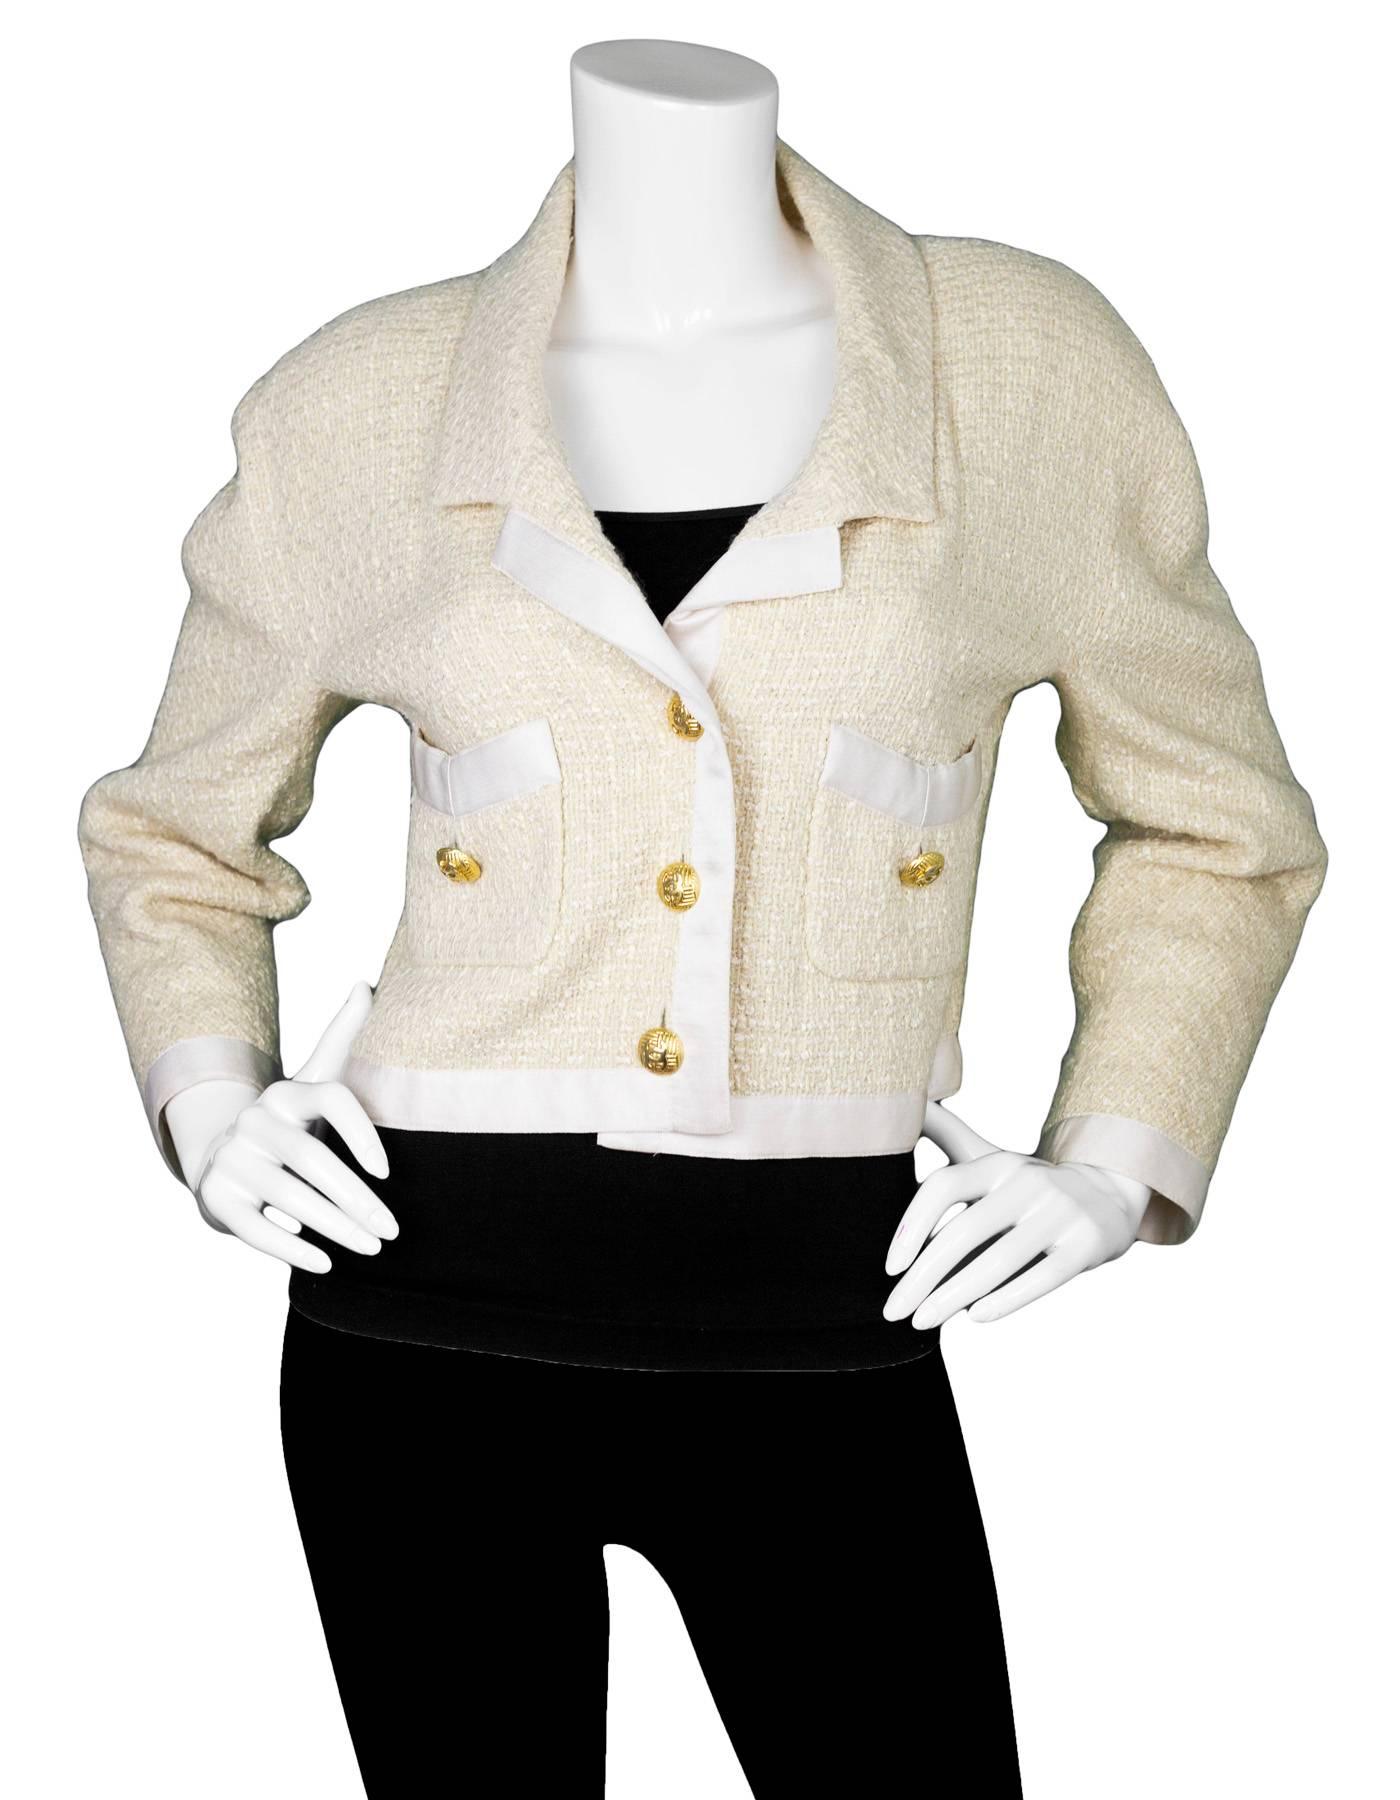 Chanel Vintage Cream Boucle & Satin Cropped Jacket

Color: Cream
Composition: not listed, feels like wool
Lining: Cream textile
Closure/Opening: Front button closure
Overall Condition: Very good vintage pre-owned condition with the exception of some